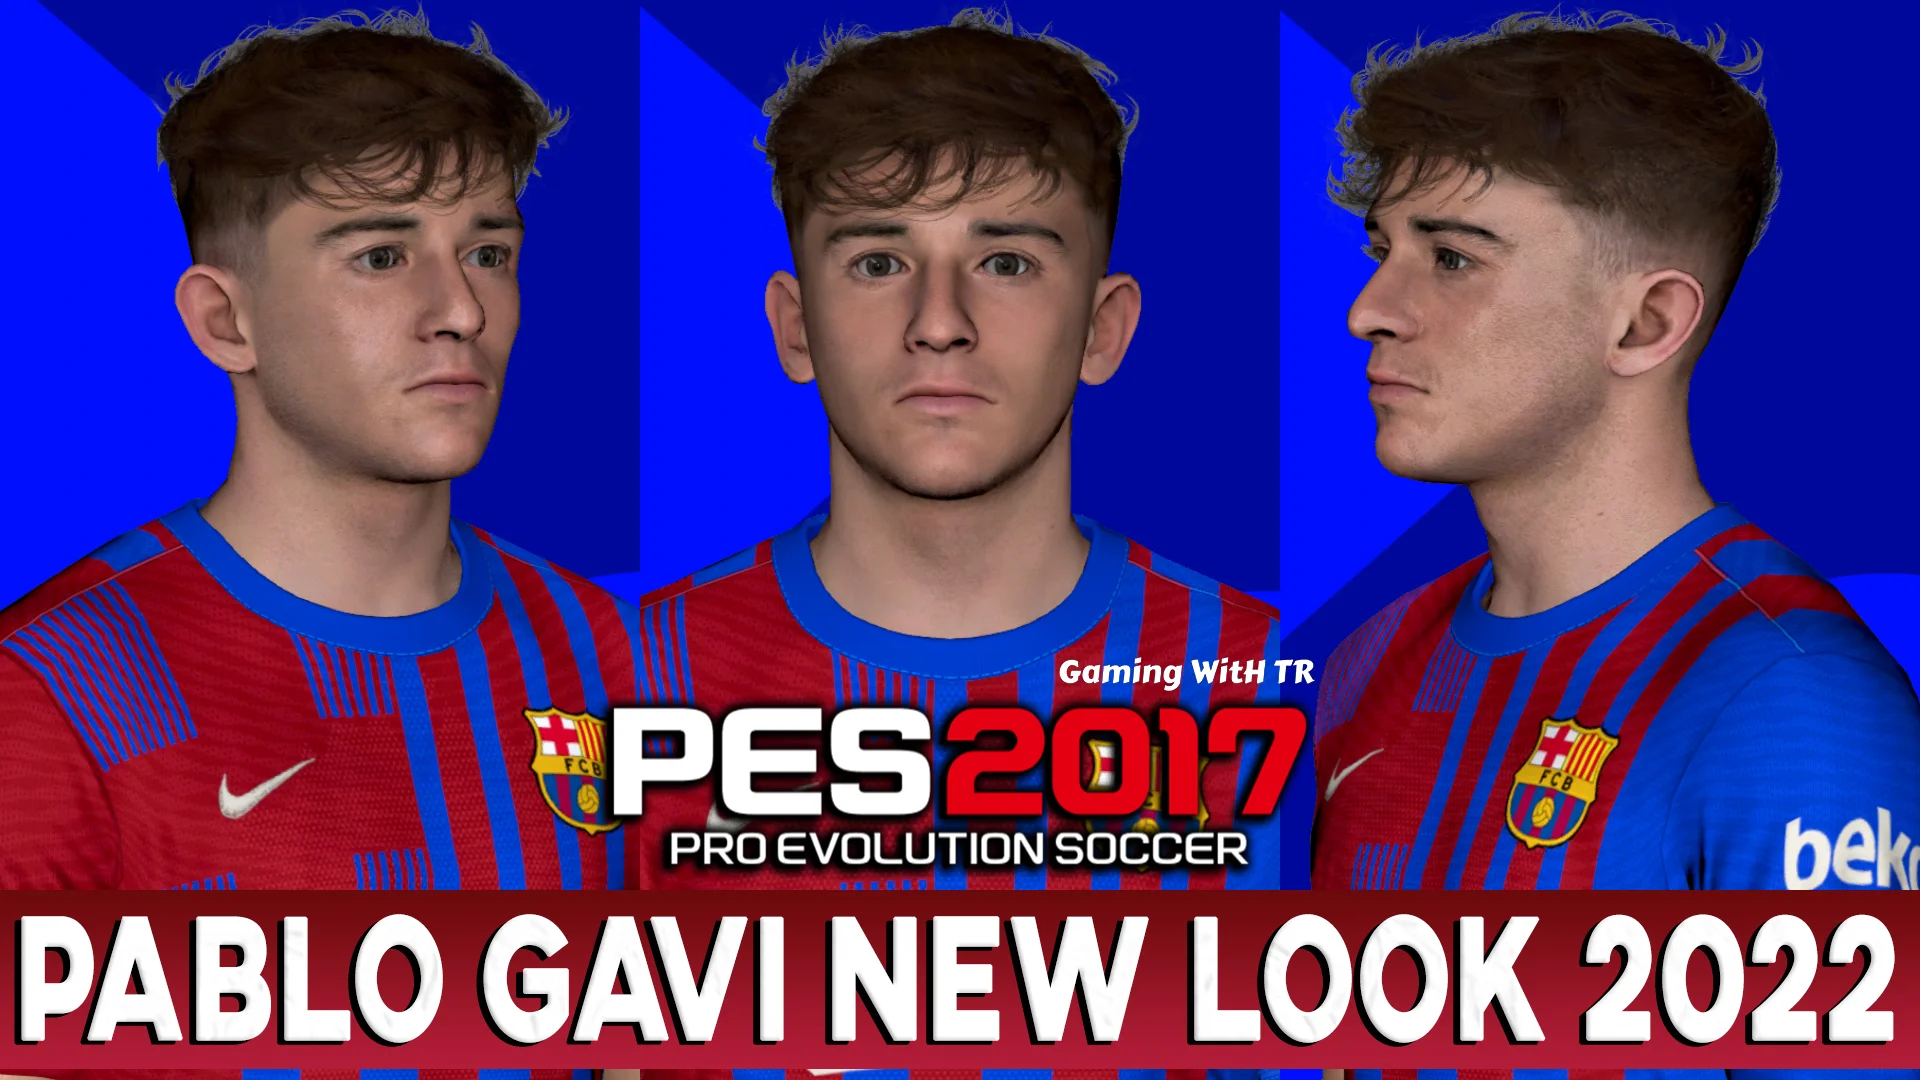 PES 2019 Master League Graphics for PES 2017 ~